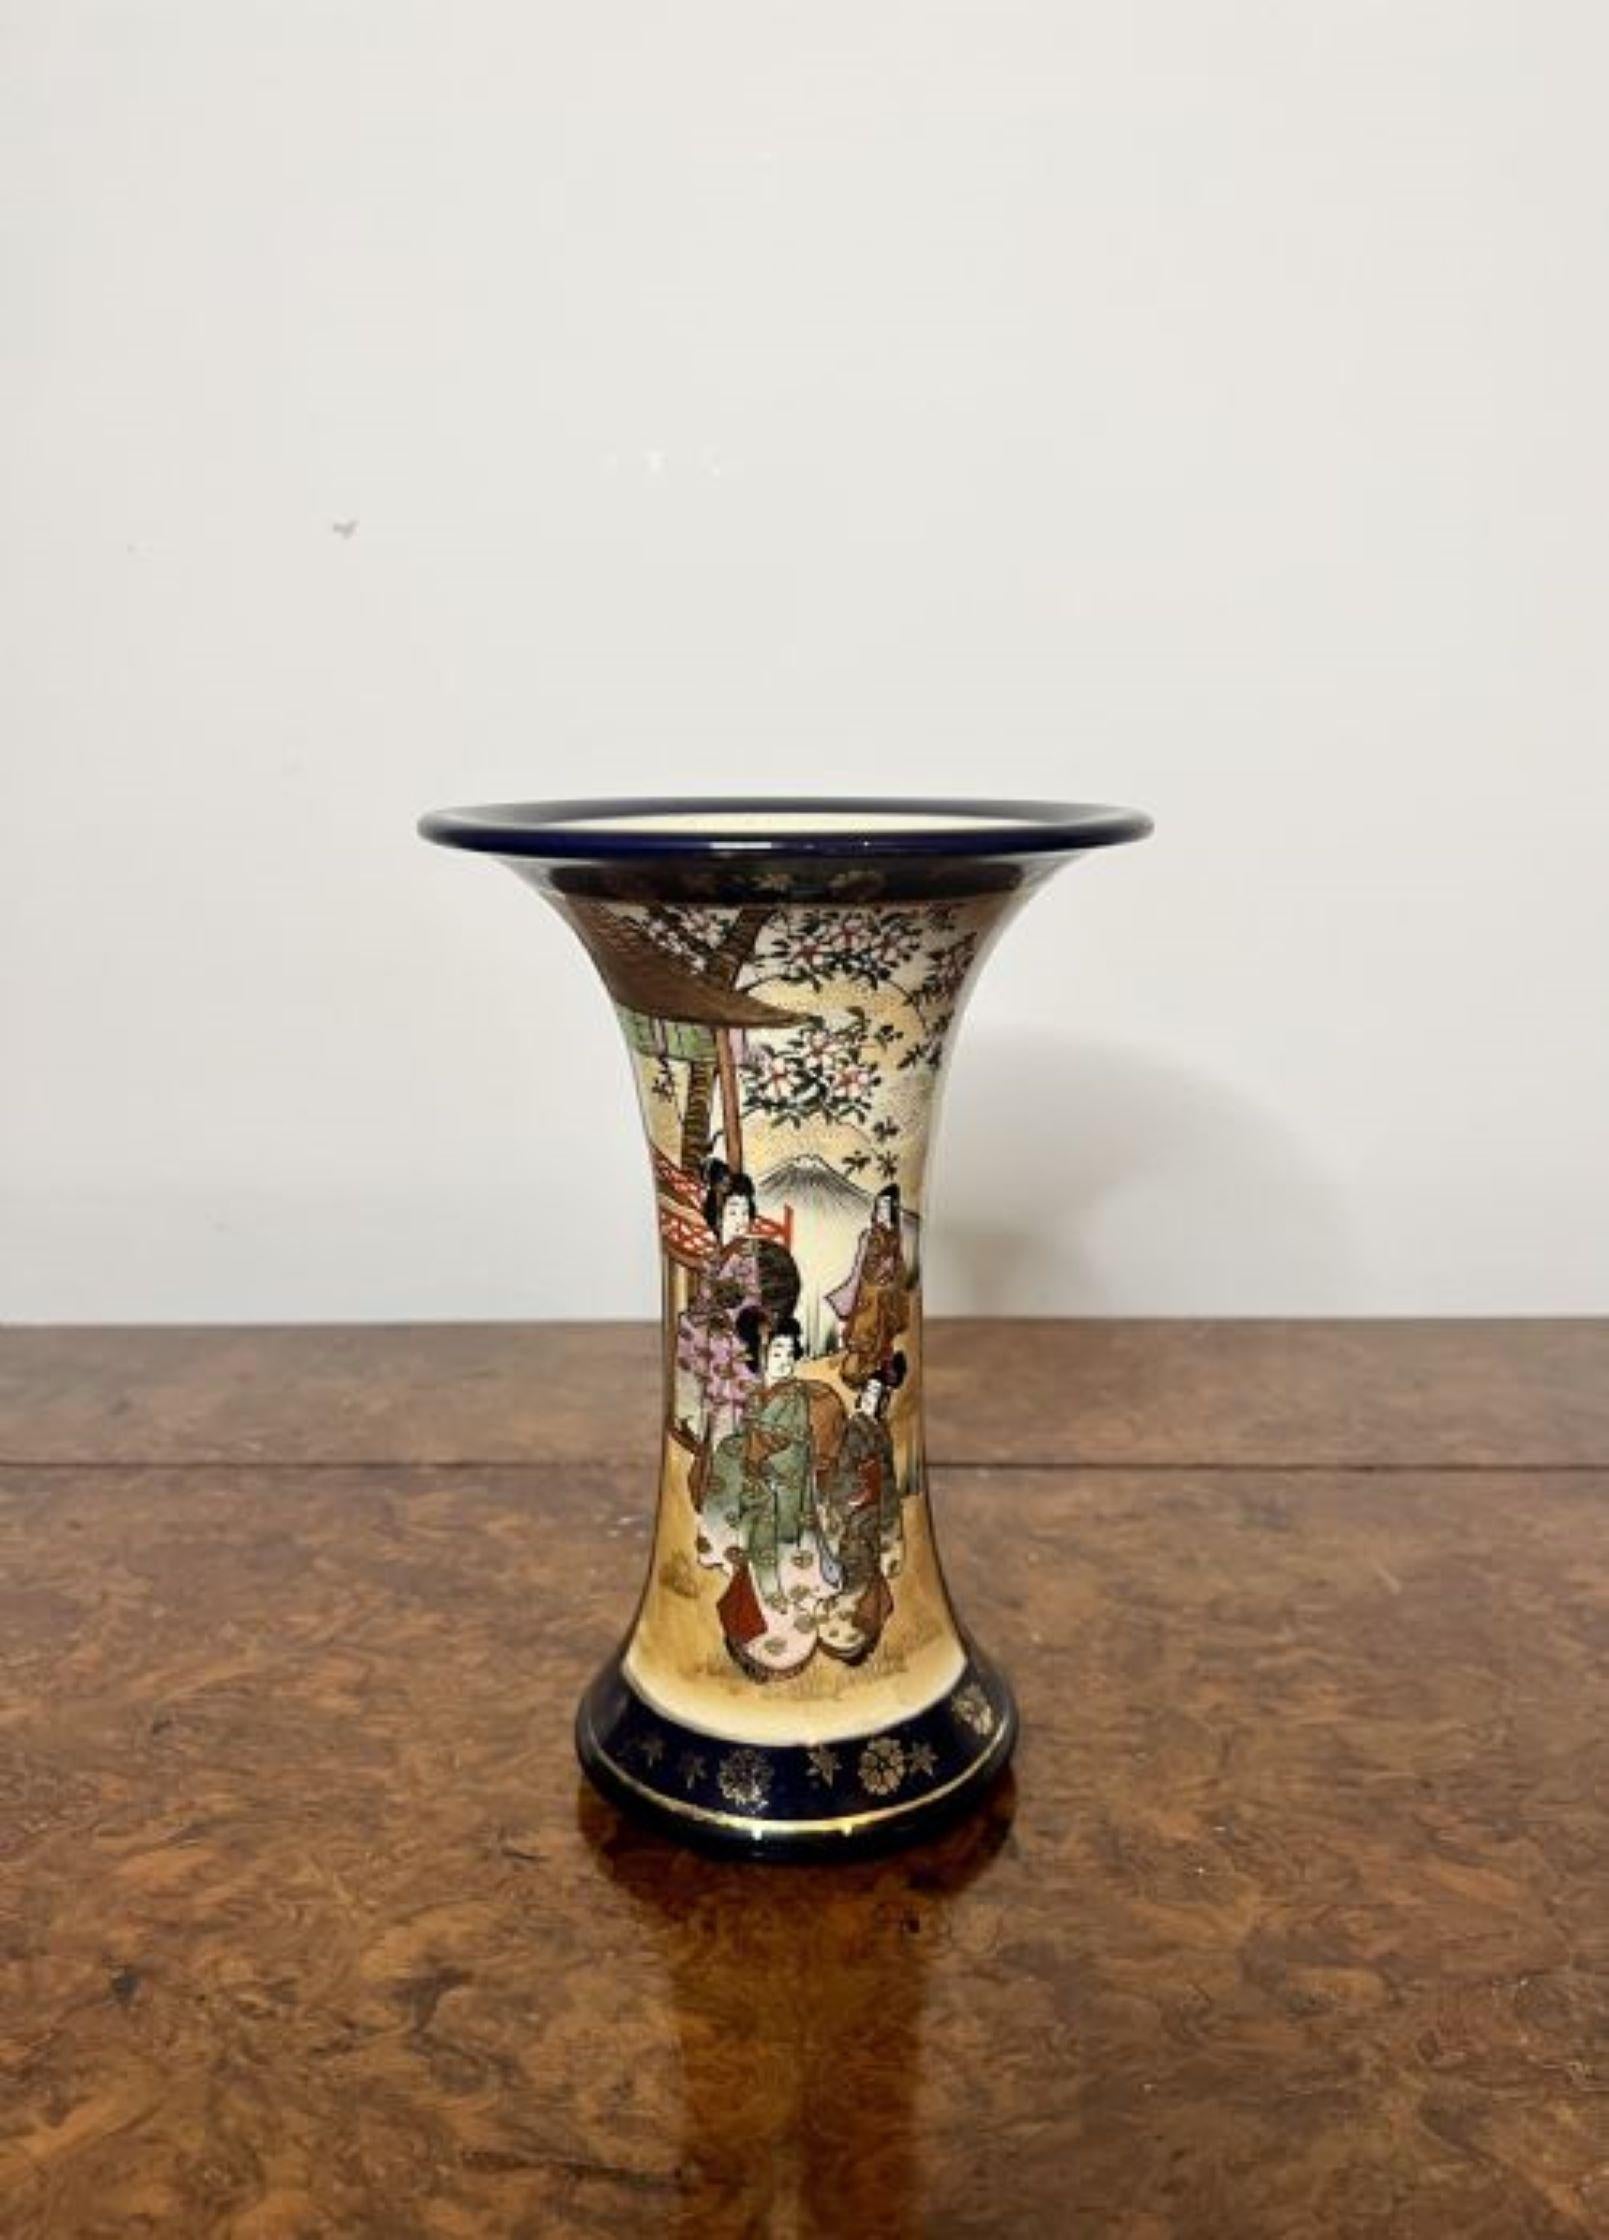 Quality antique Japanese satsuma shaped vase having a wonderful hand painted decoration of figural and landscape scenes in stunning blue, brown, green, red and gold colours.
